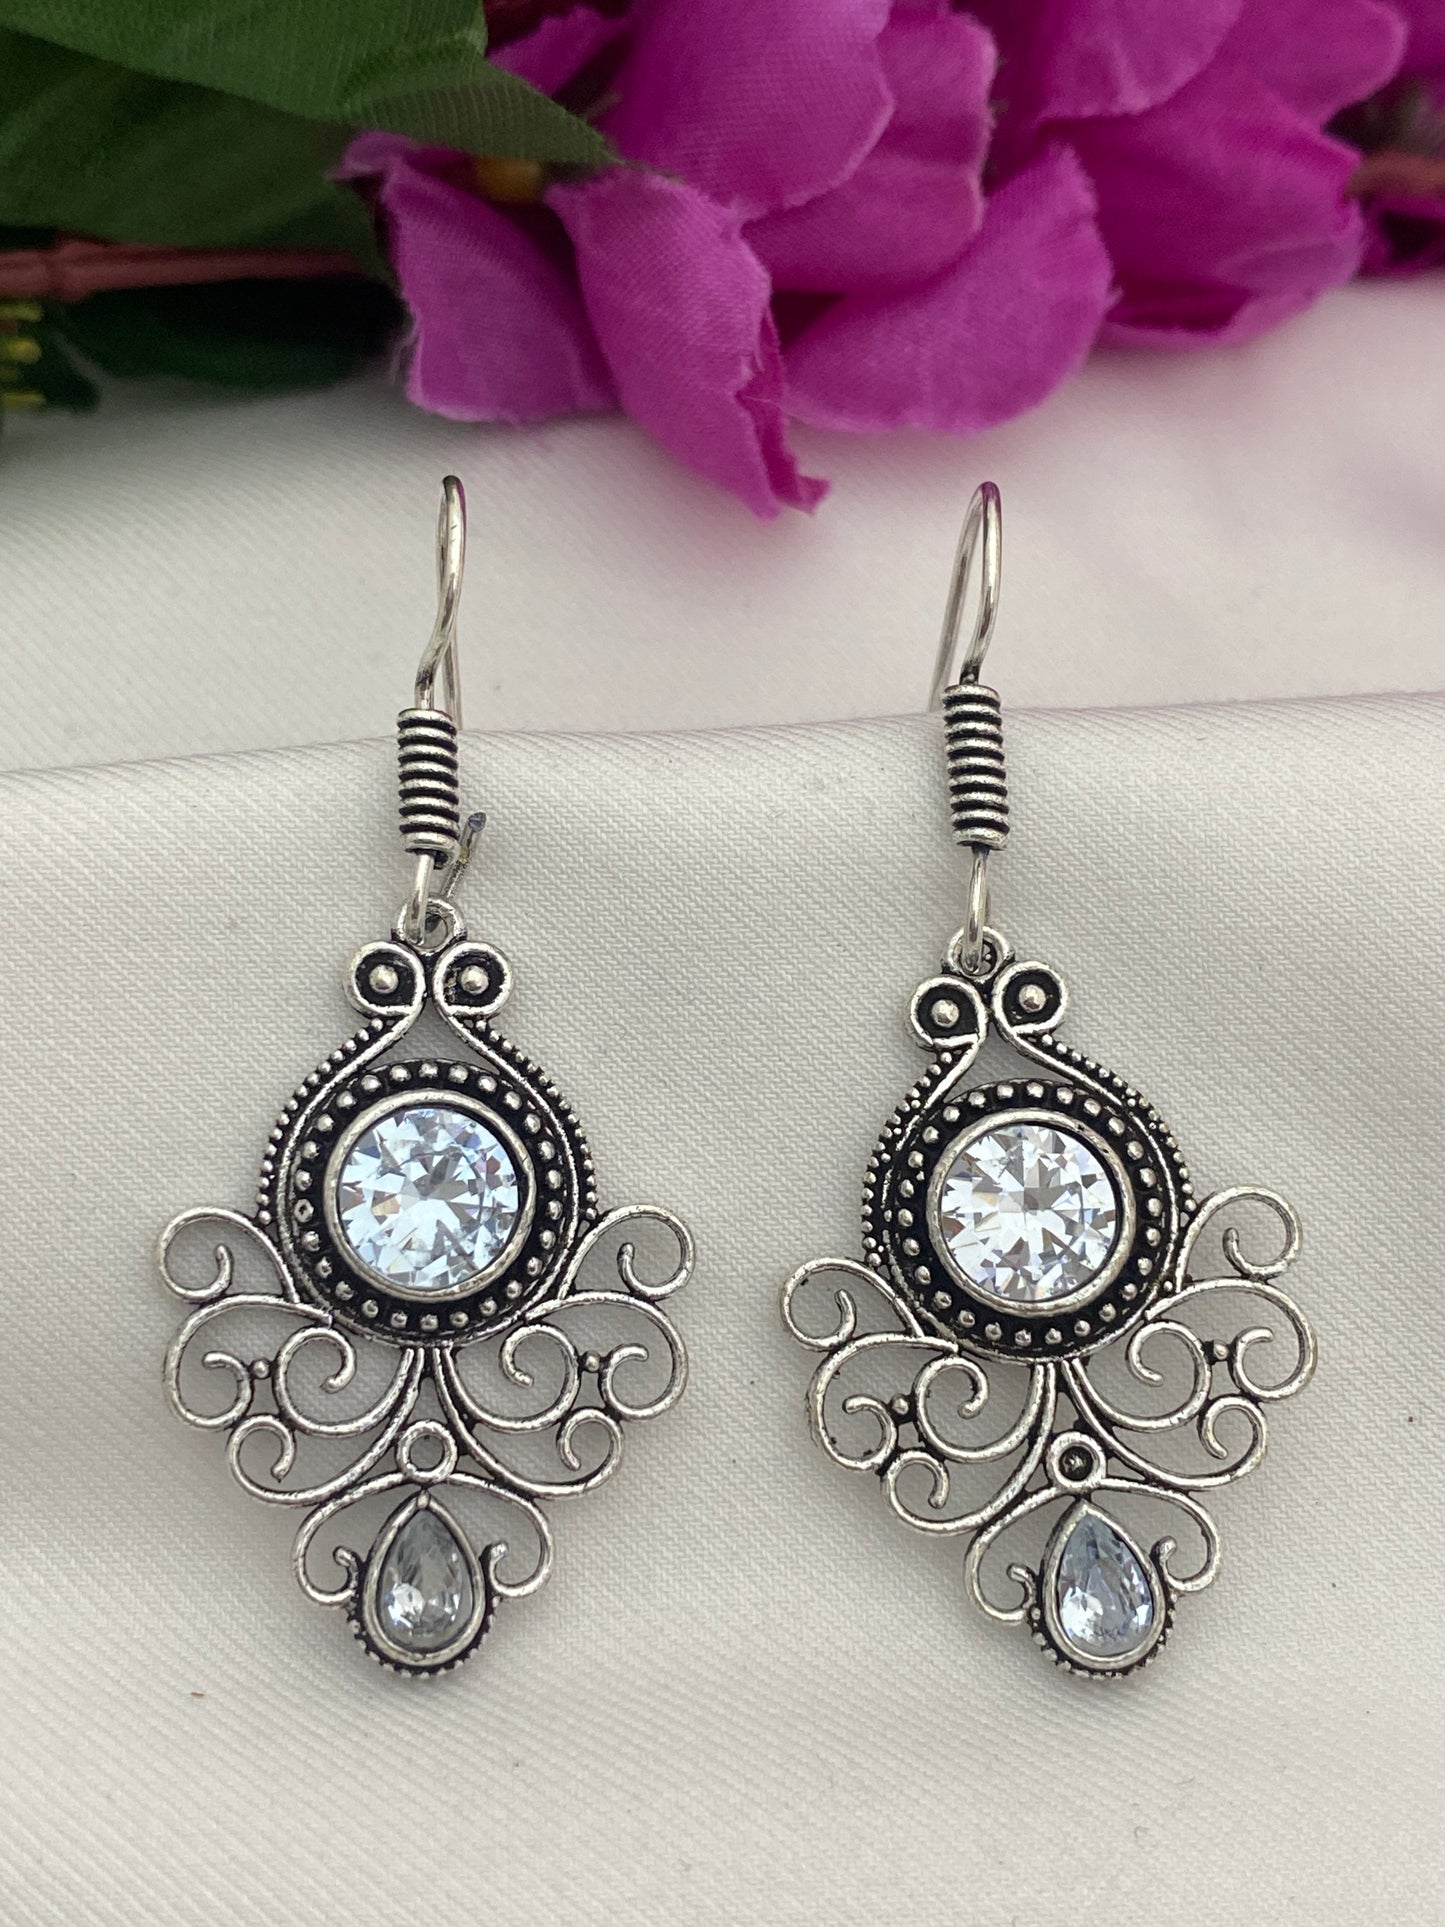 Silver Plated Oxidized With White Color Stone Earrings Near Me